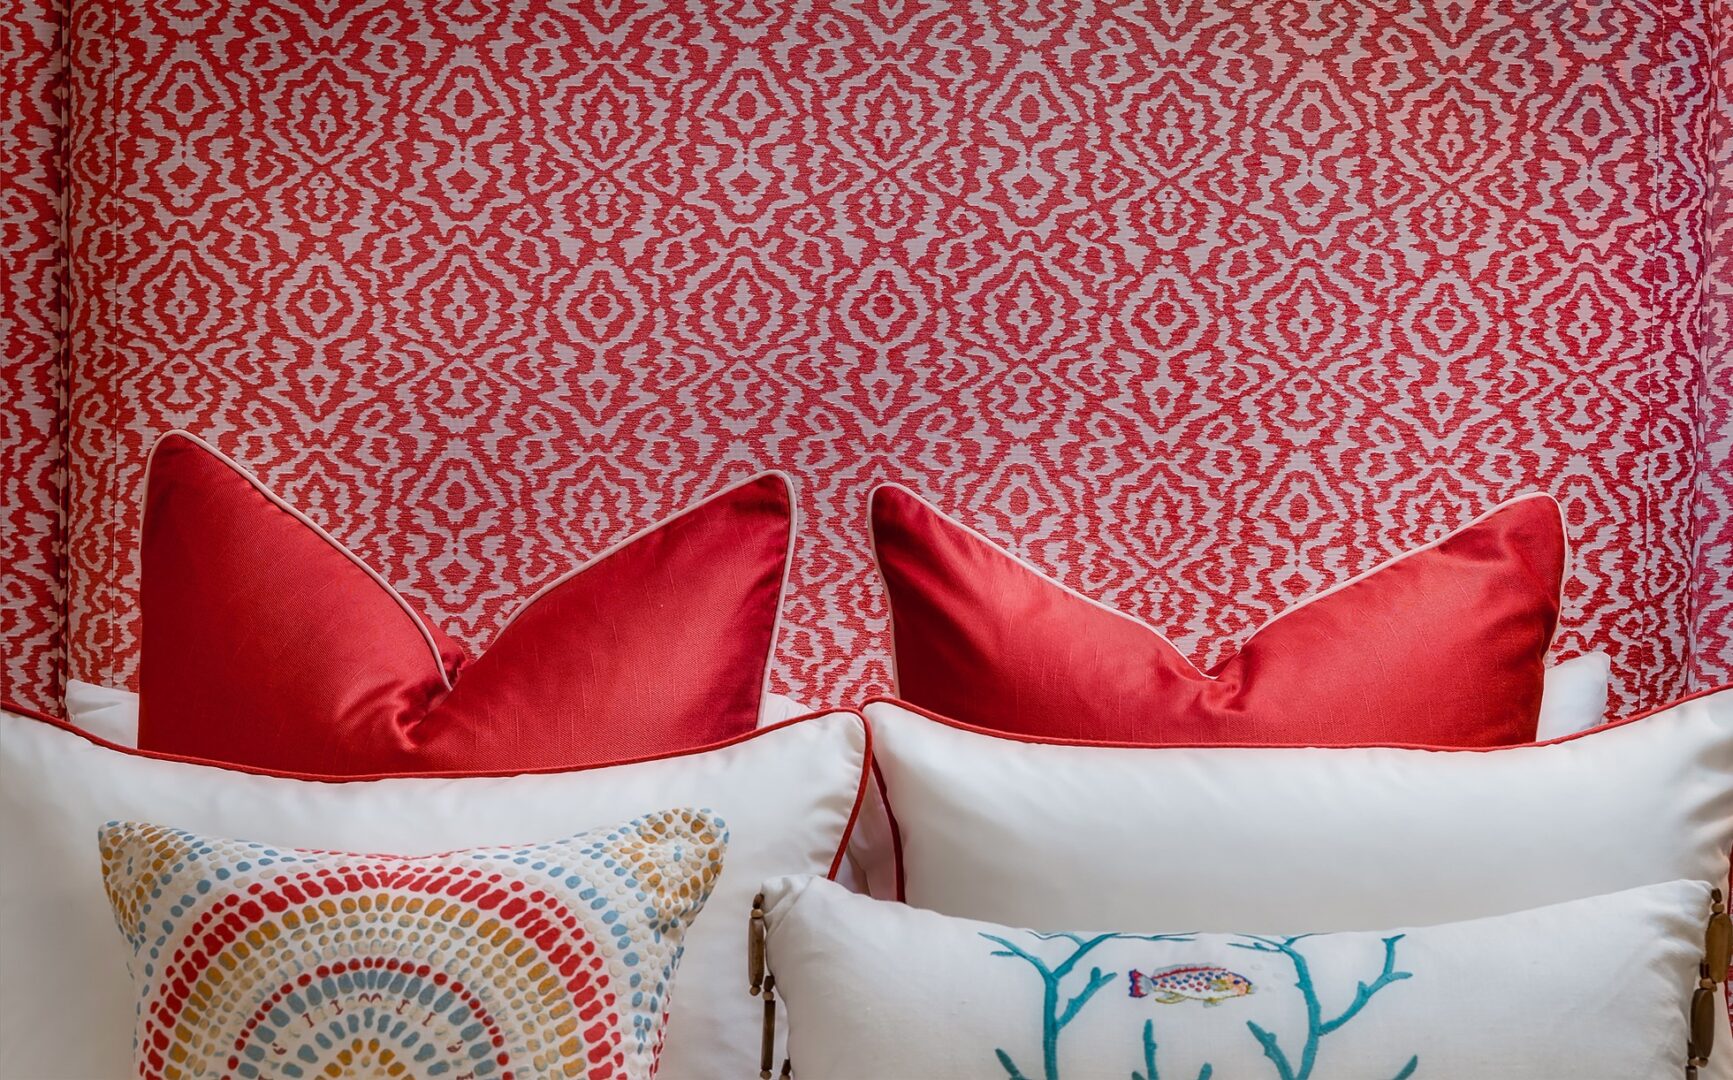 Red and white pillows